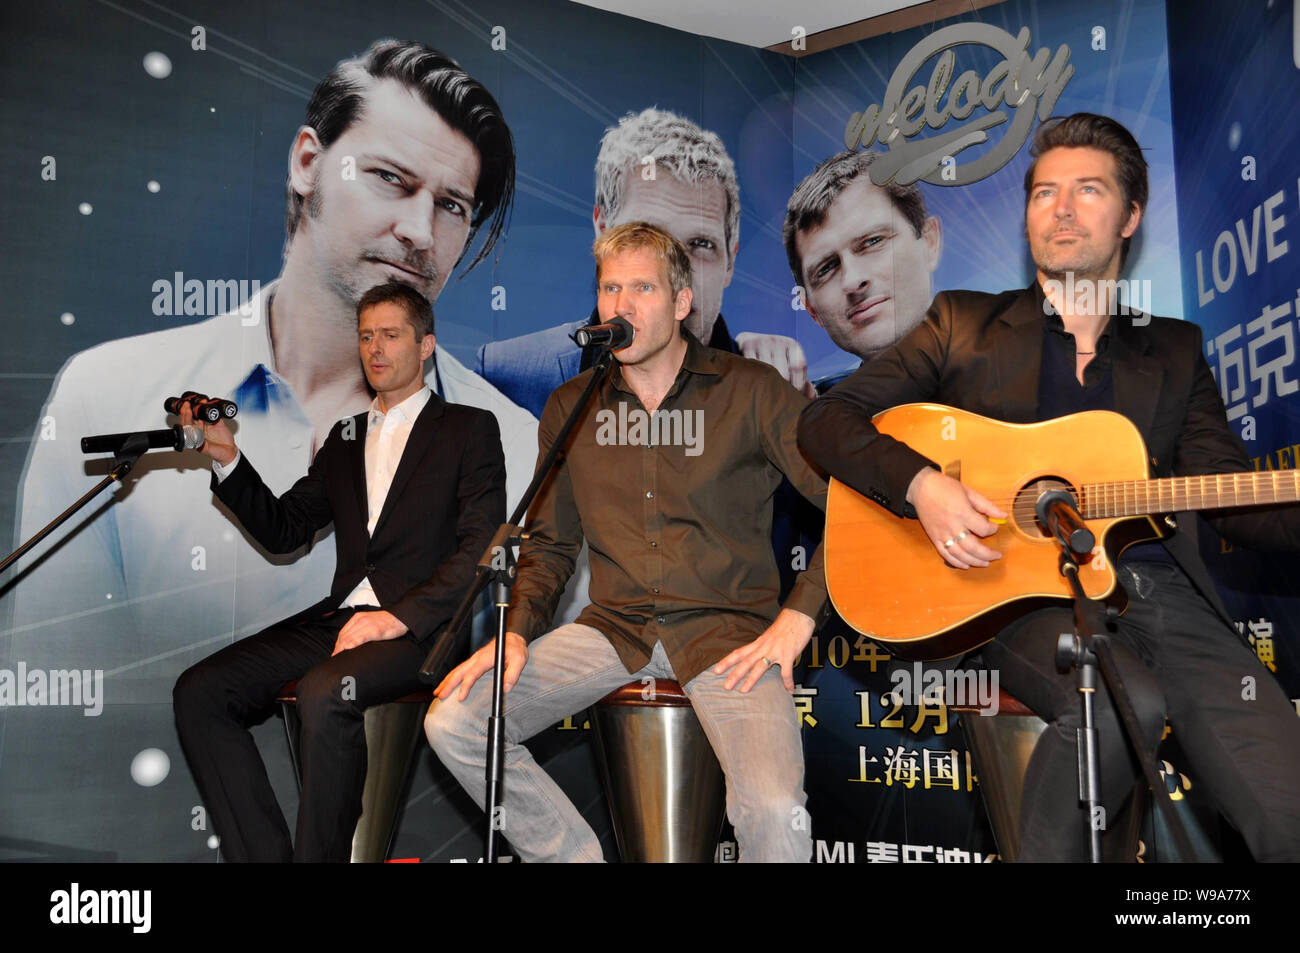 Danish rock band Michael Learns to Rock, known as MLTR, performs during a meeting with Chinese fans in Shanghai, China, 6 December 2010.   Michael Lea Stock Photo